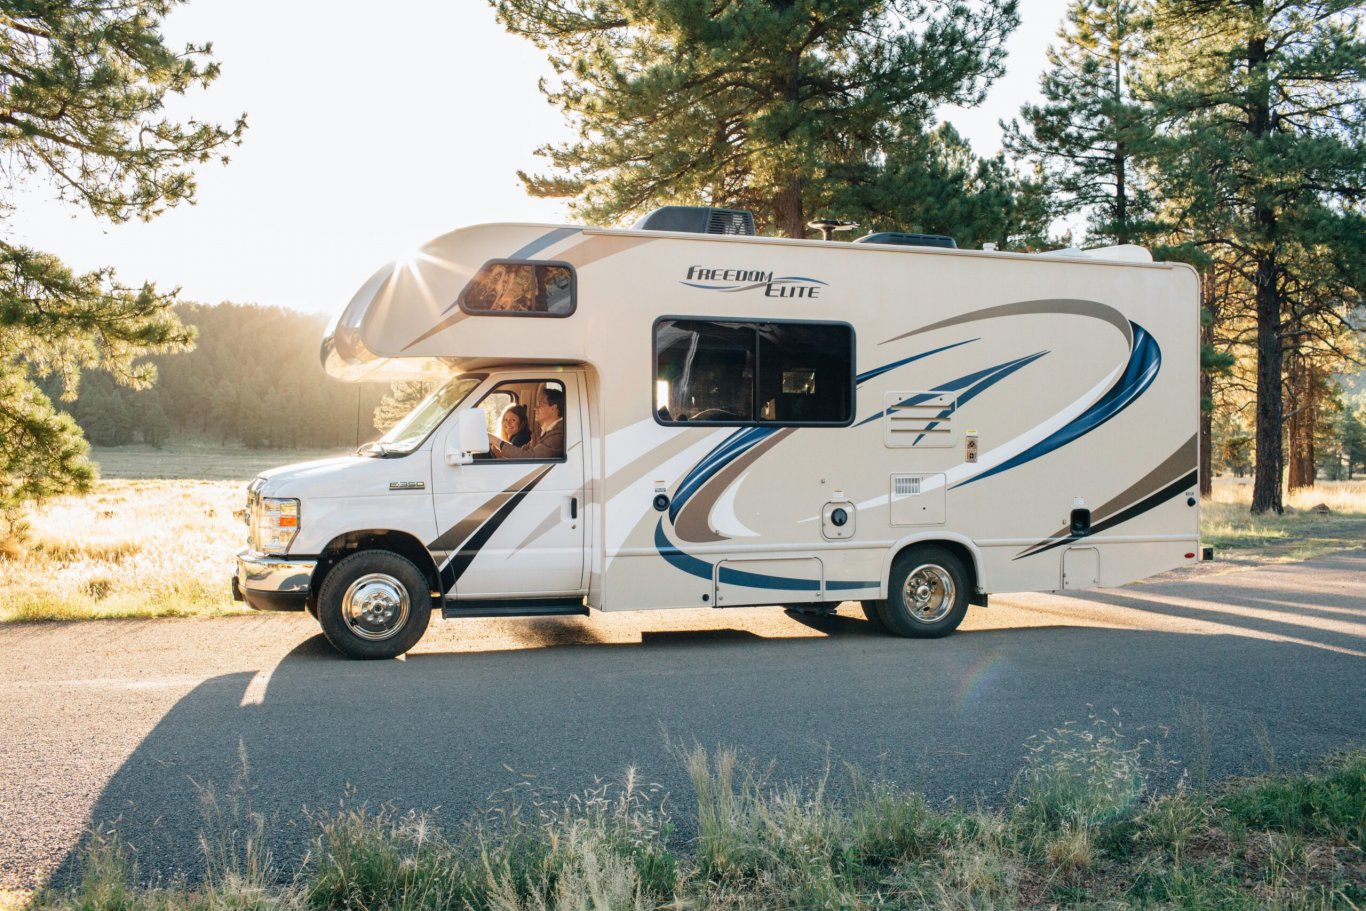 4 Things You Should Keep in Mind When Financing an RV